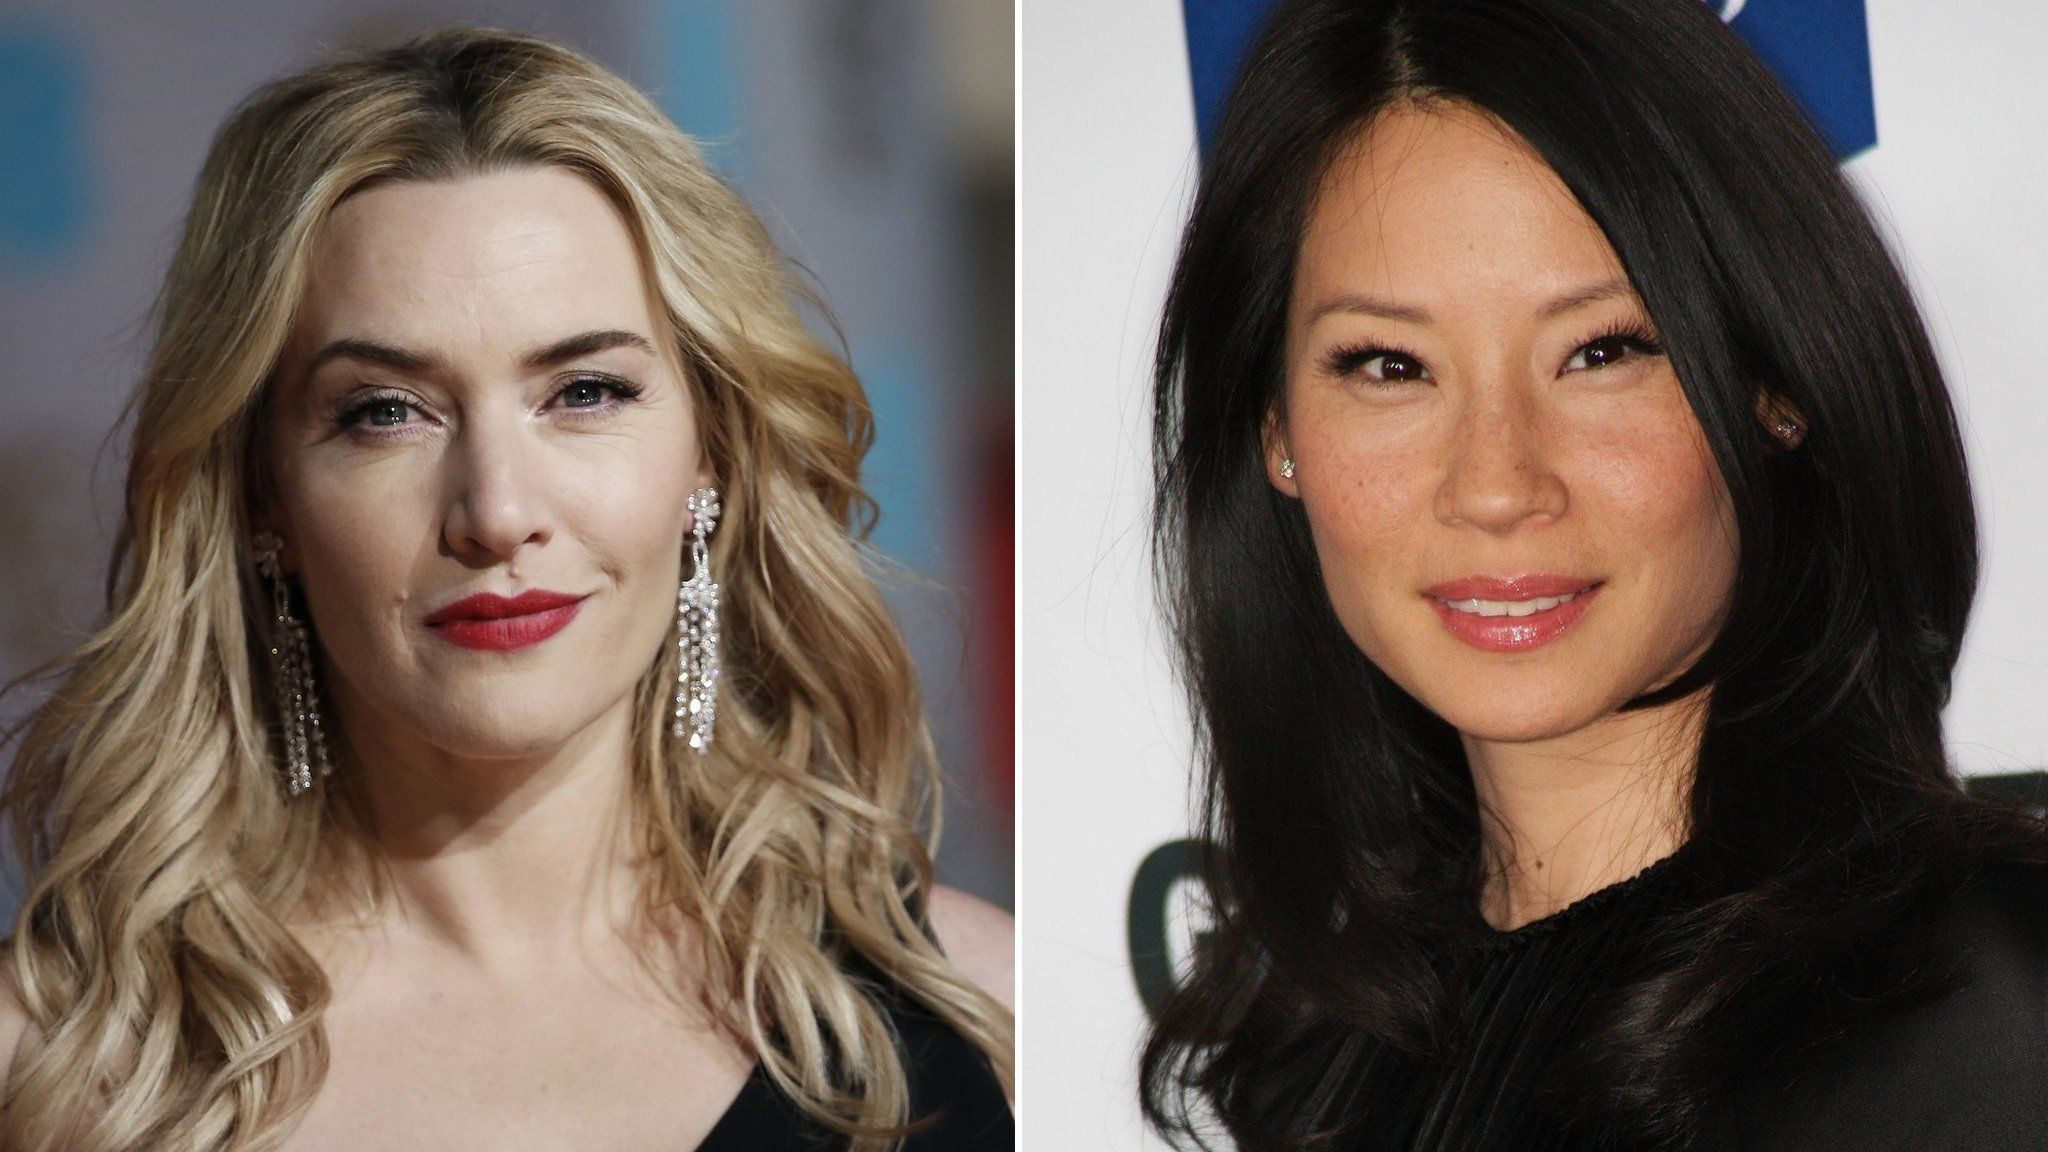 Composite picture showing British actress Kate Winslet and American actress Lucy Liu